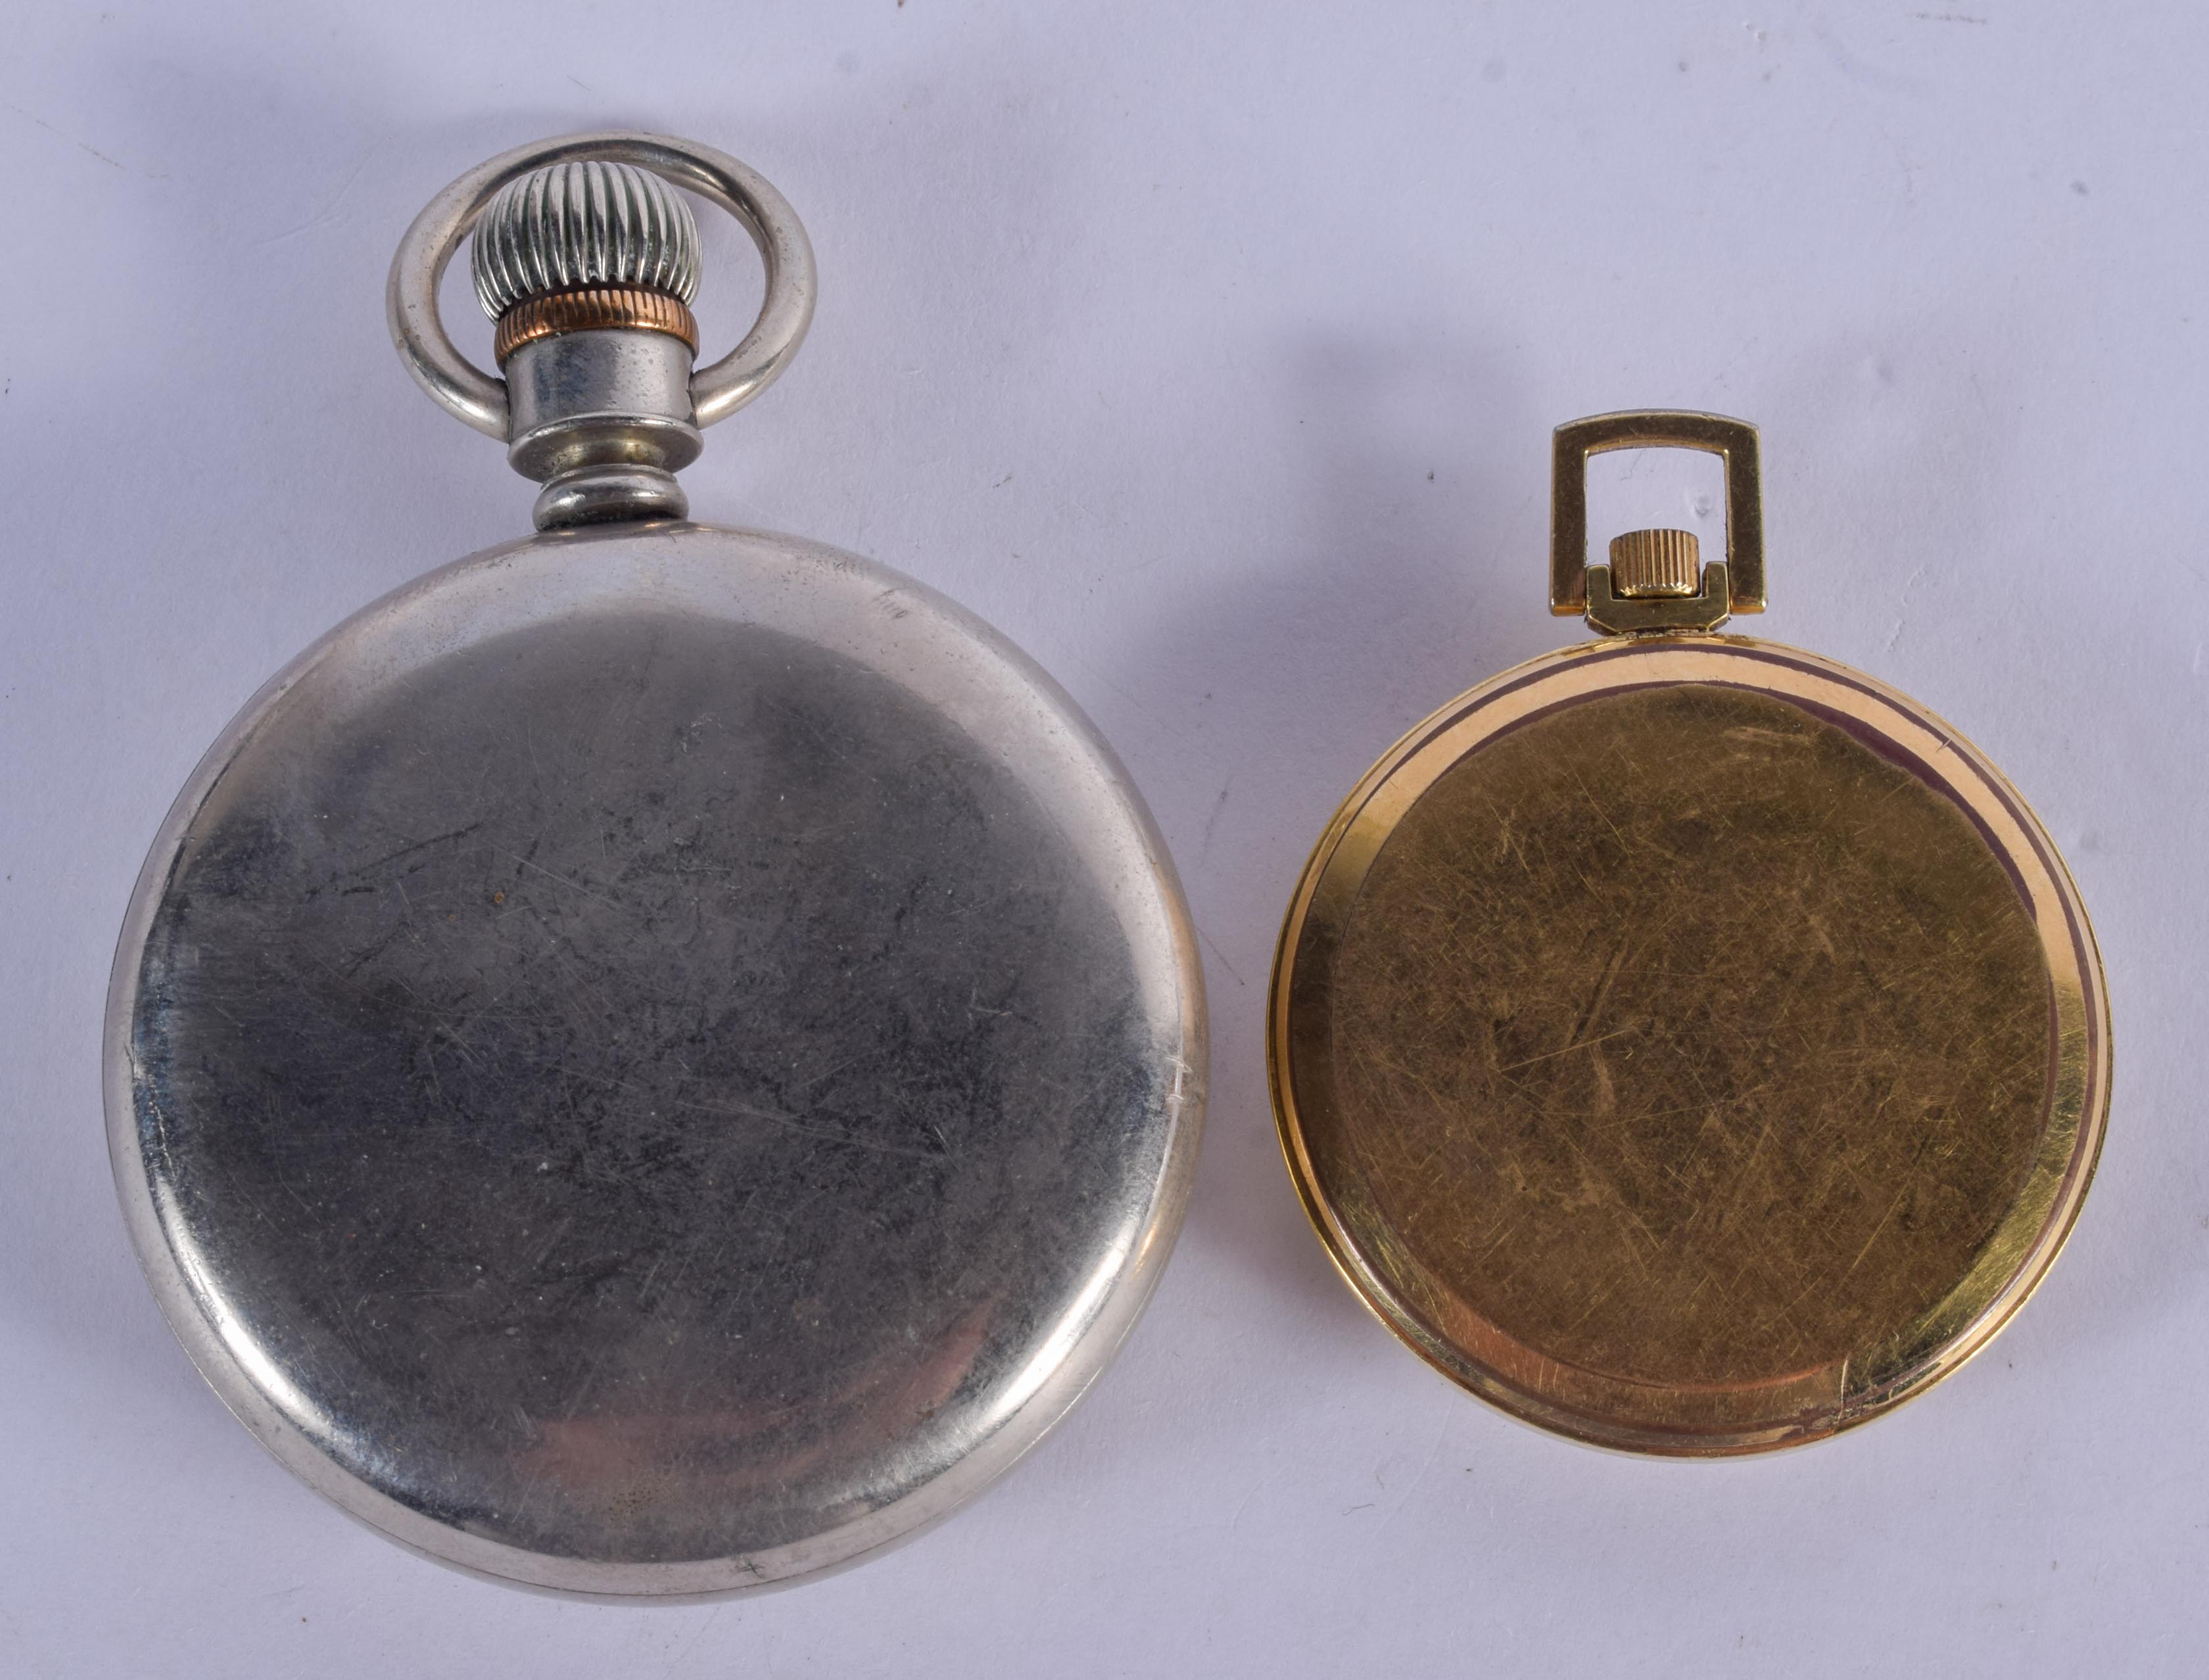 A THOMAS RUSSEL & SON POCKET WATCH and a smaller retime watch. Largest 5 cm wide. (2) - Image 2 of 3